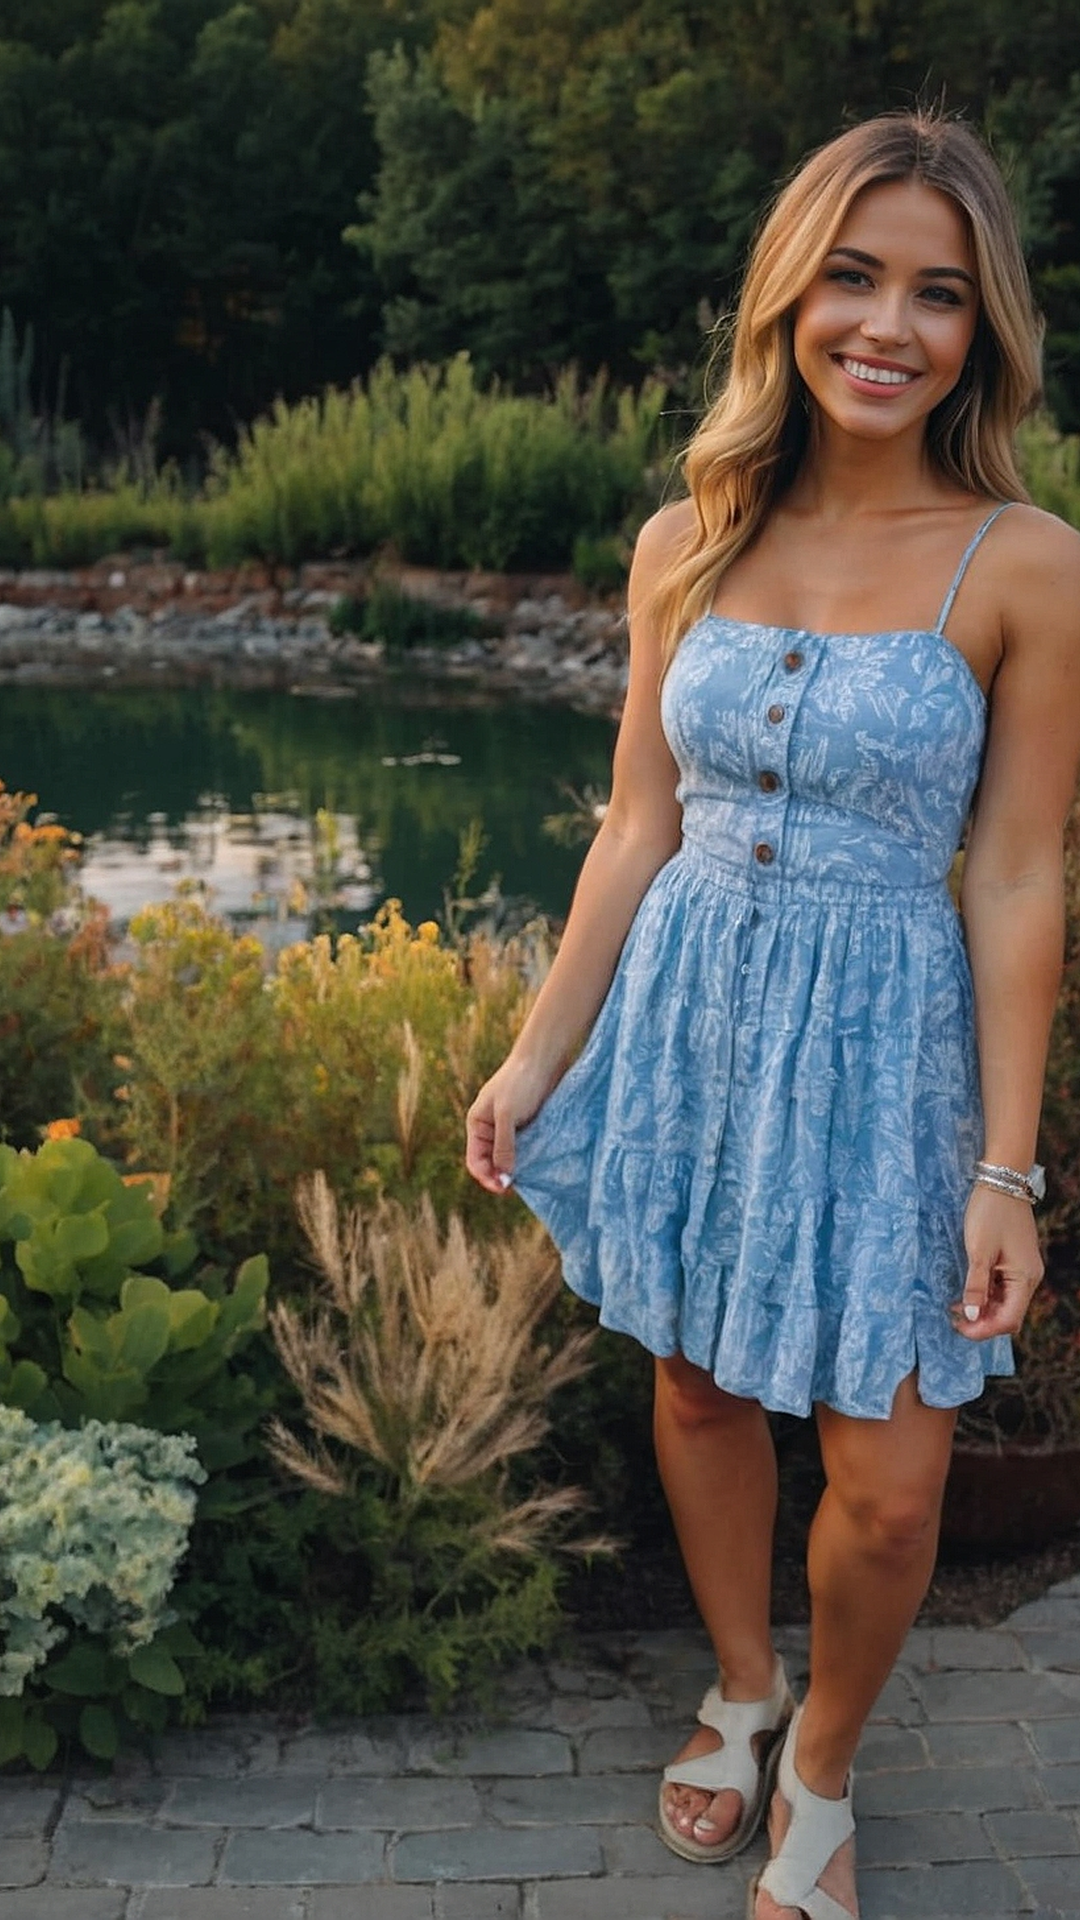 Perfect Picnic Outfits: Women’s Summer Style Inspiration